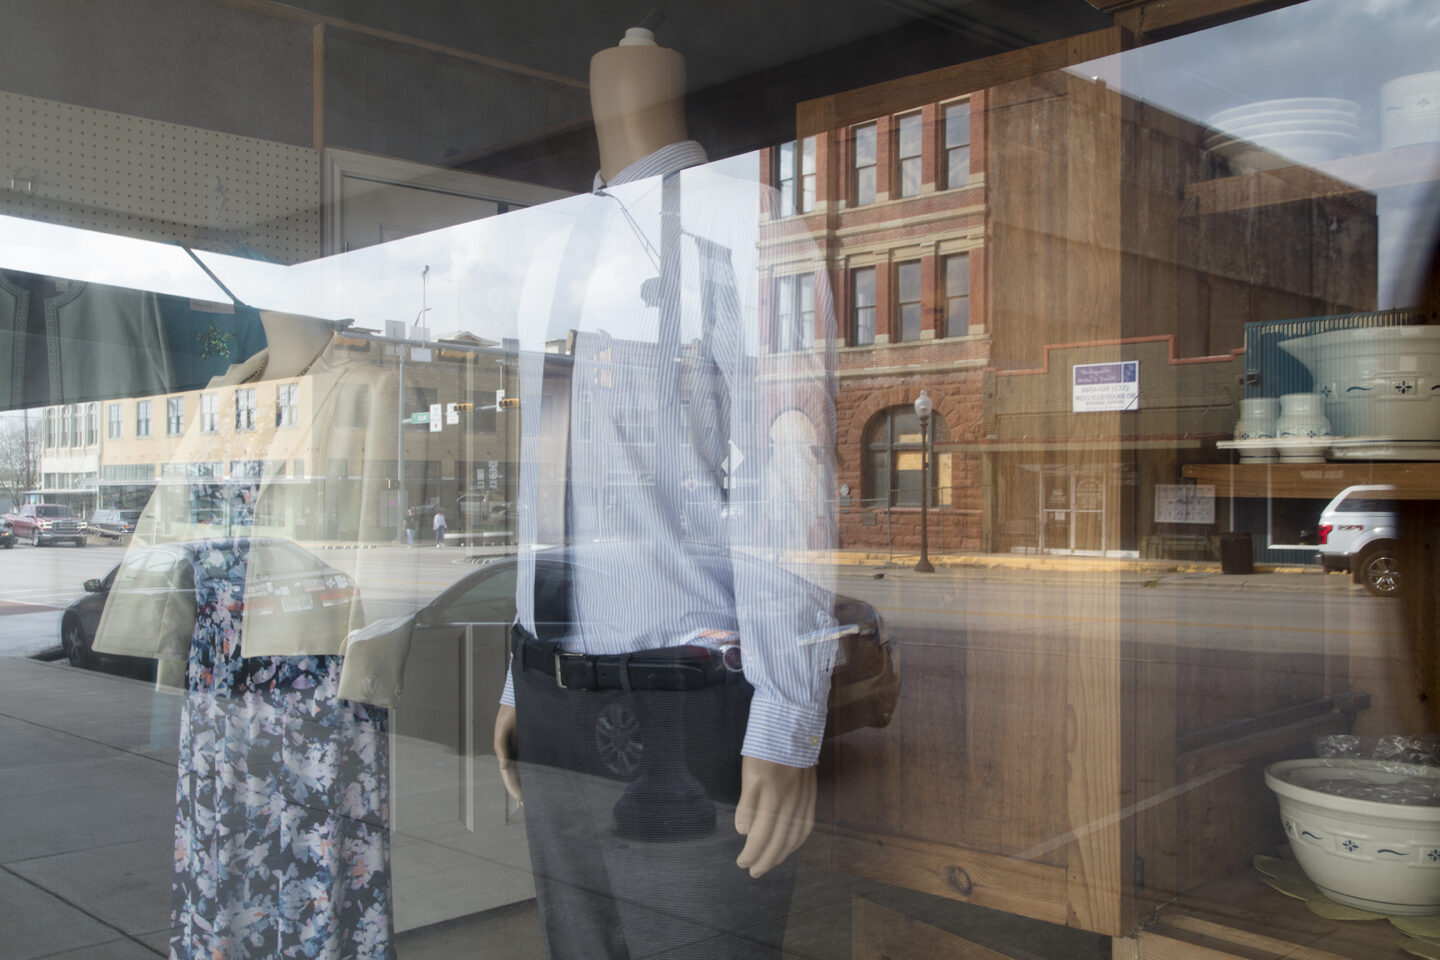 Reflections of a shop window in downtown Taylor, Texas featuring his and her mannequins 